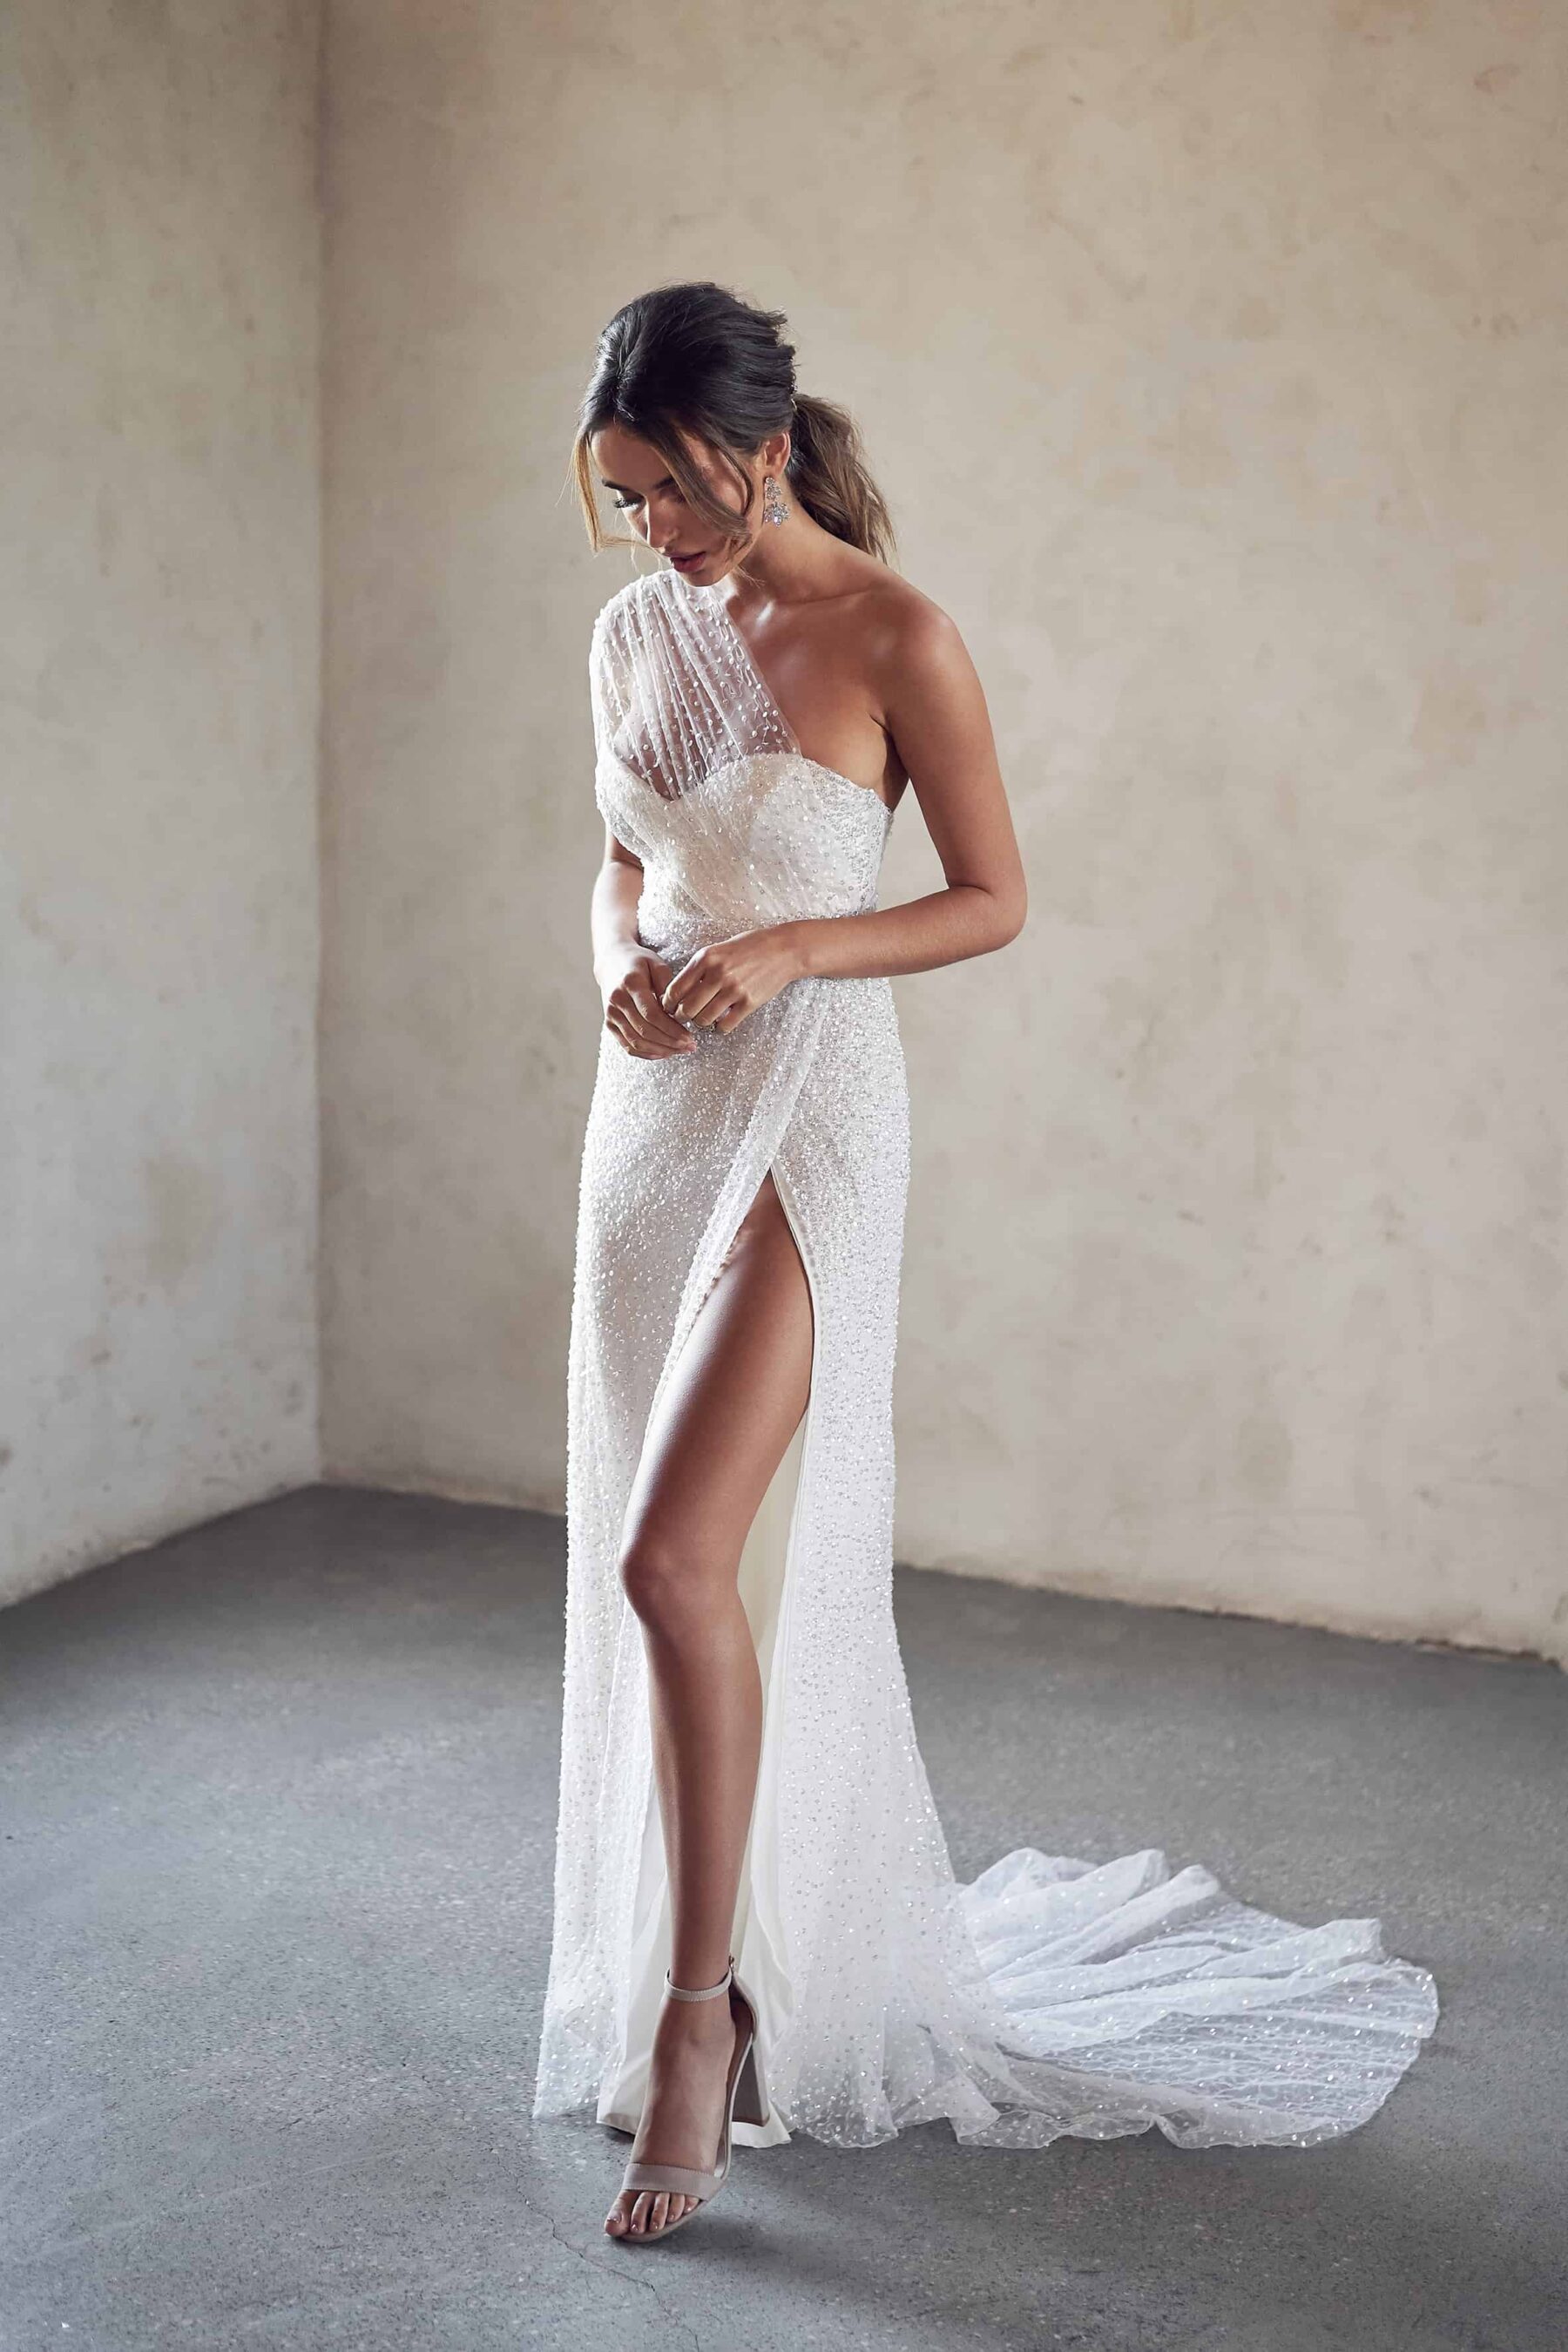 ‘Lumière’ – The Ethereal New Bridal Collection by Anna Campbell